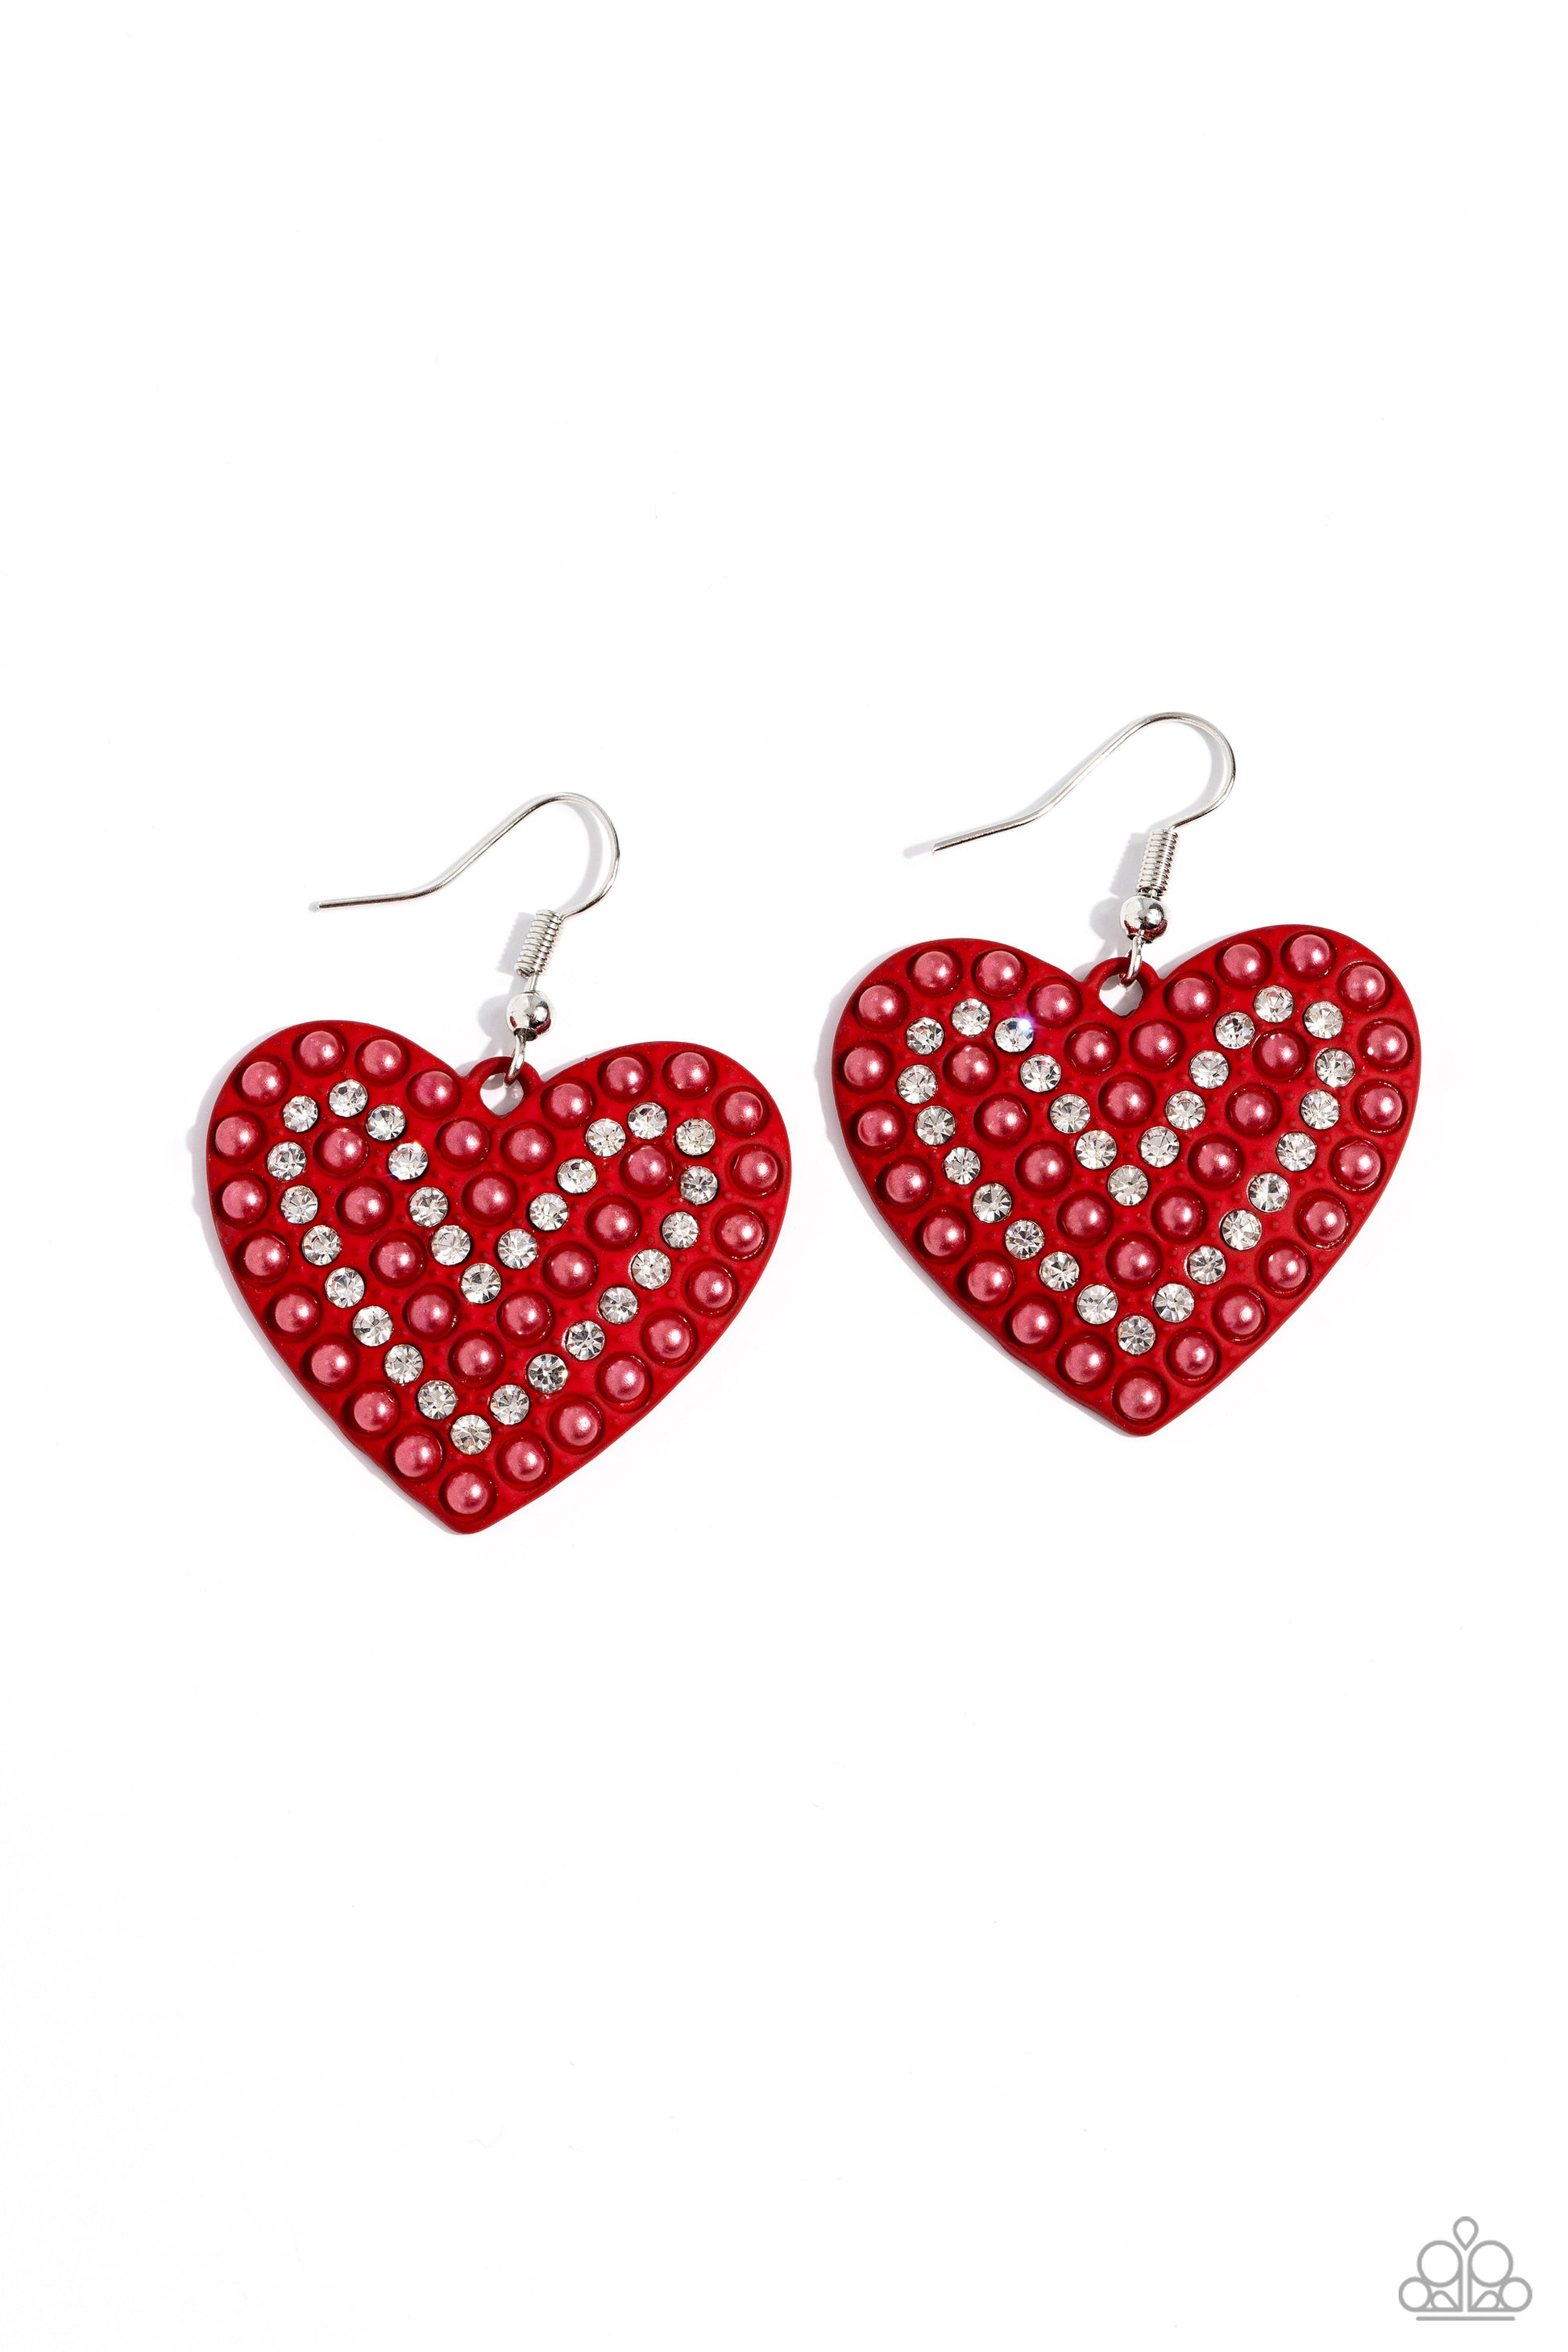 <p>A red-painted heart is covered in rows of tiny white rhinestones and red pearls, emitting radiant shimmer as it swings from the ear. Earring attaches to a standard fishhook fitting.</p> <p><i> Sold as one pair of earrings.</i></p>